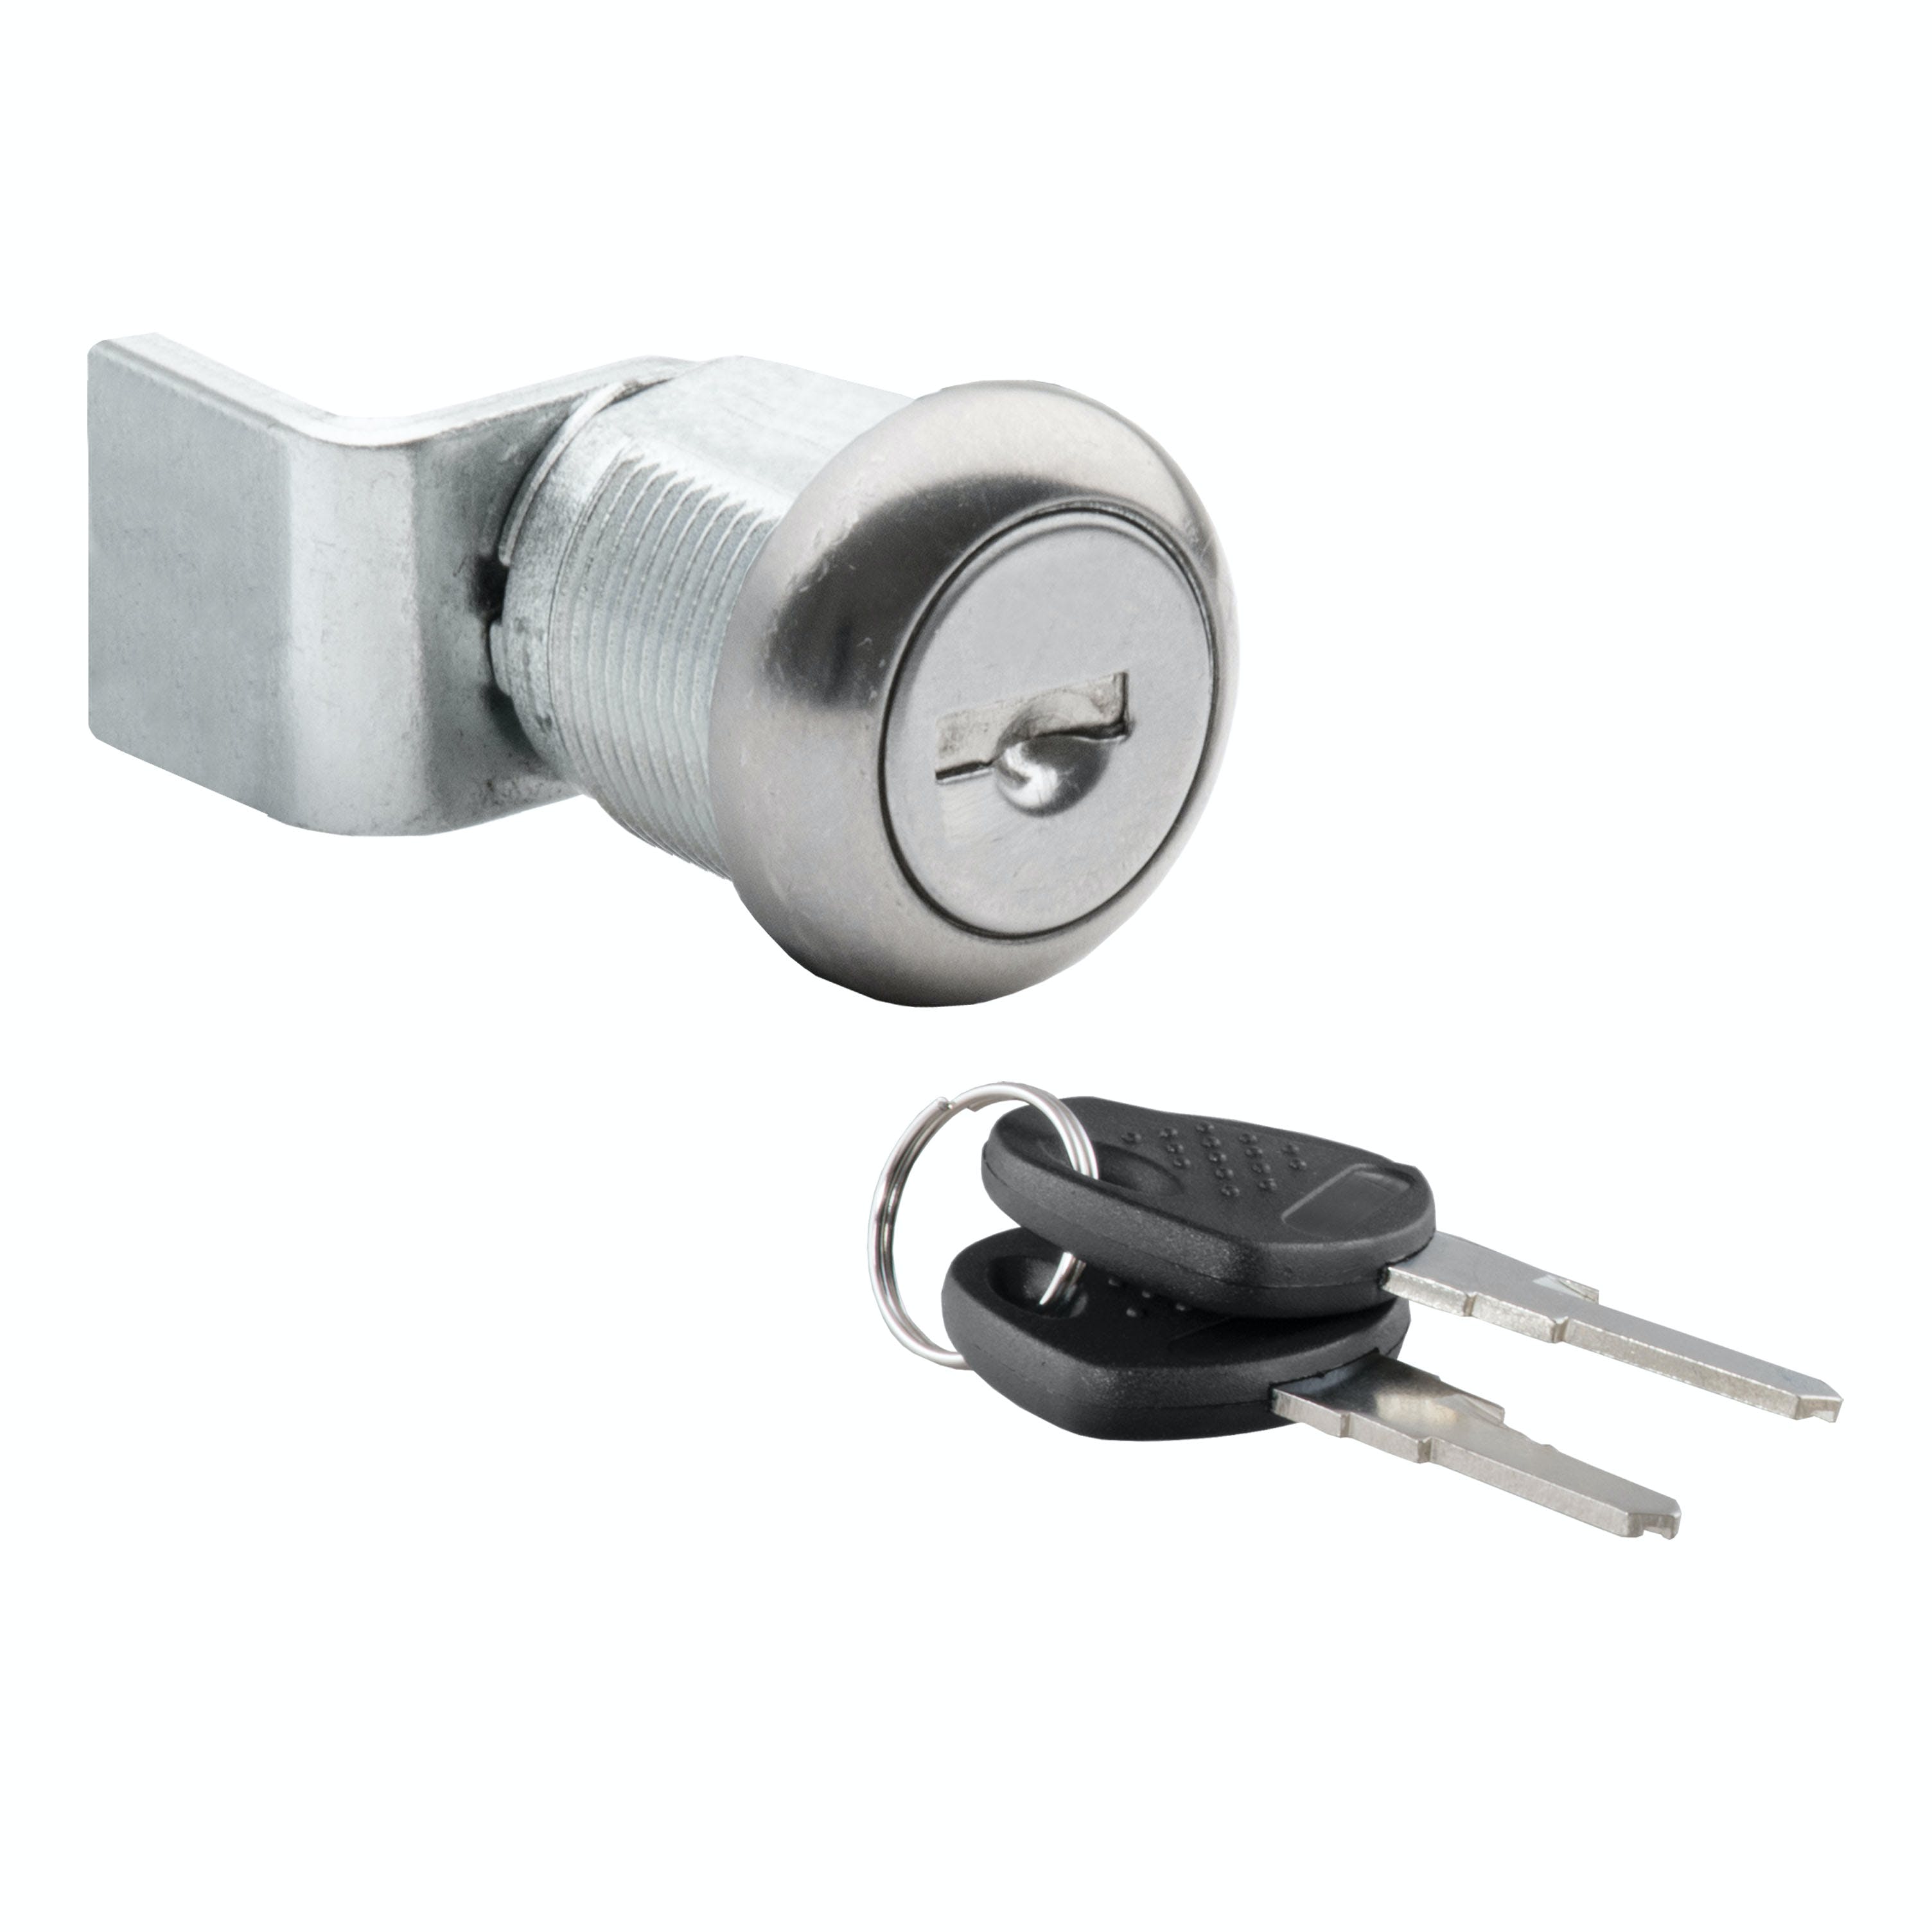 UWS 003-RYTHCY-002 Replacement T-Handle Lock Cylinder and Keys